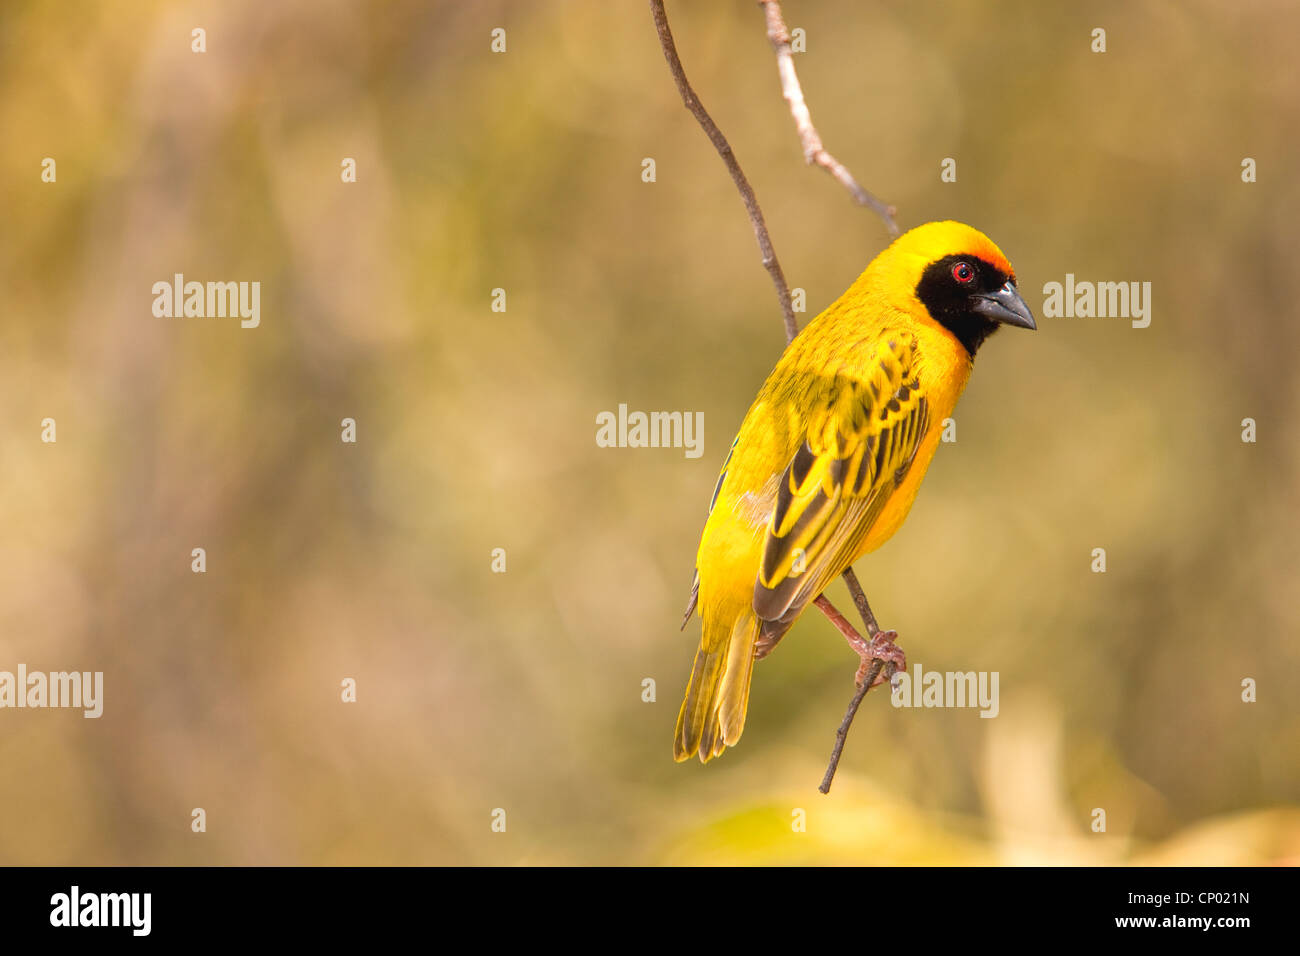 Village Weaver (Ploceus cucullatus), or Spotted-backed Weaver or Black-headed Weaver at Pilanesberg Park, South Africa Stock Photo